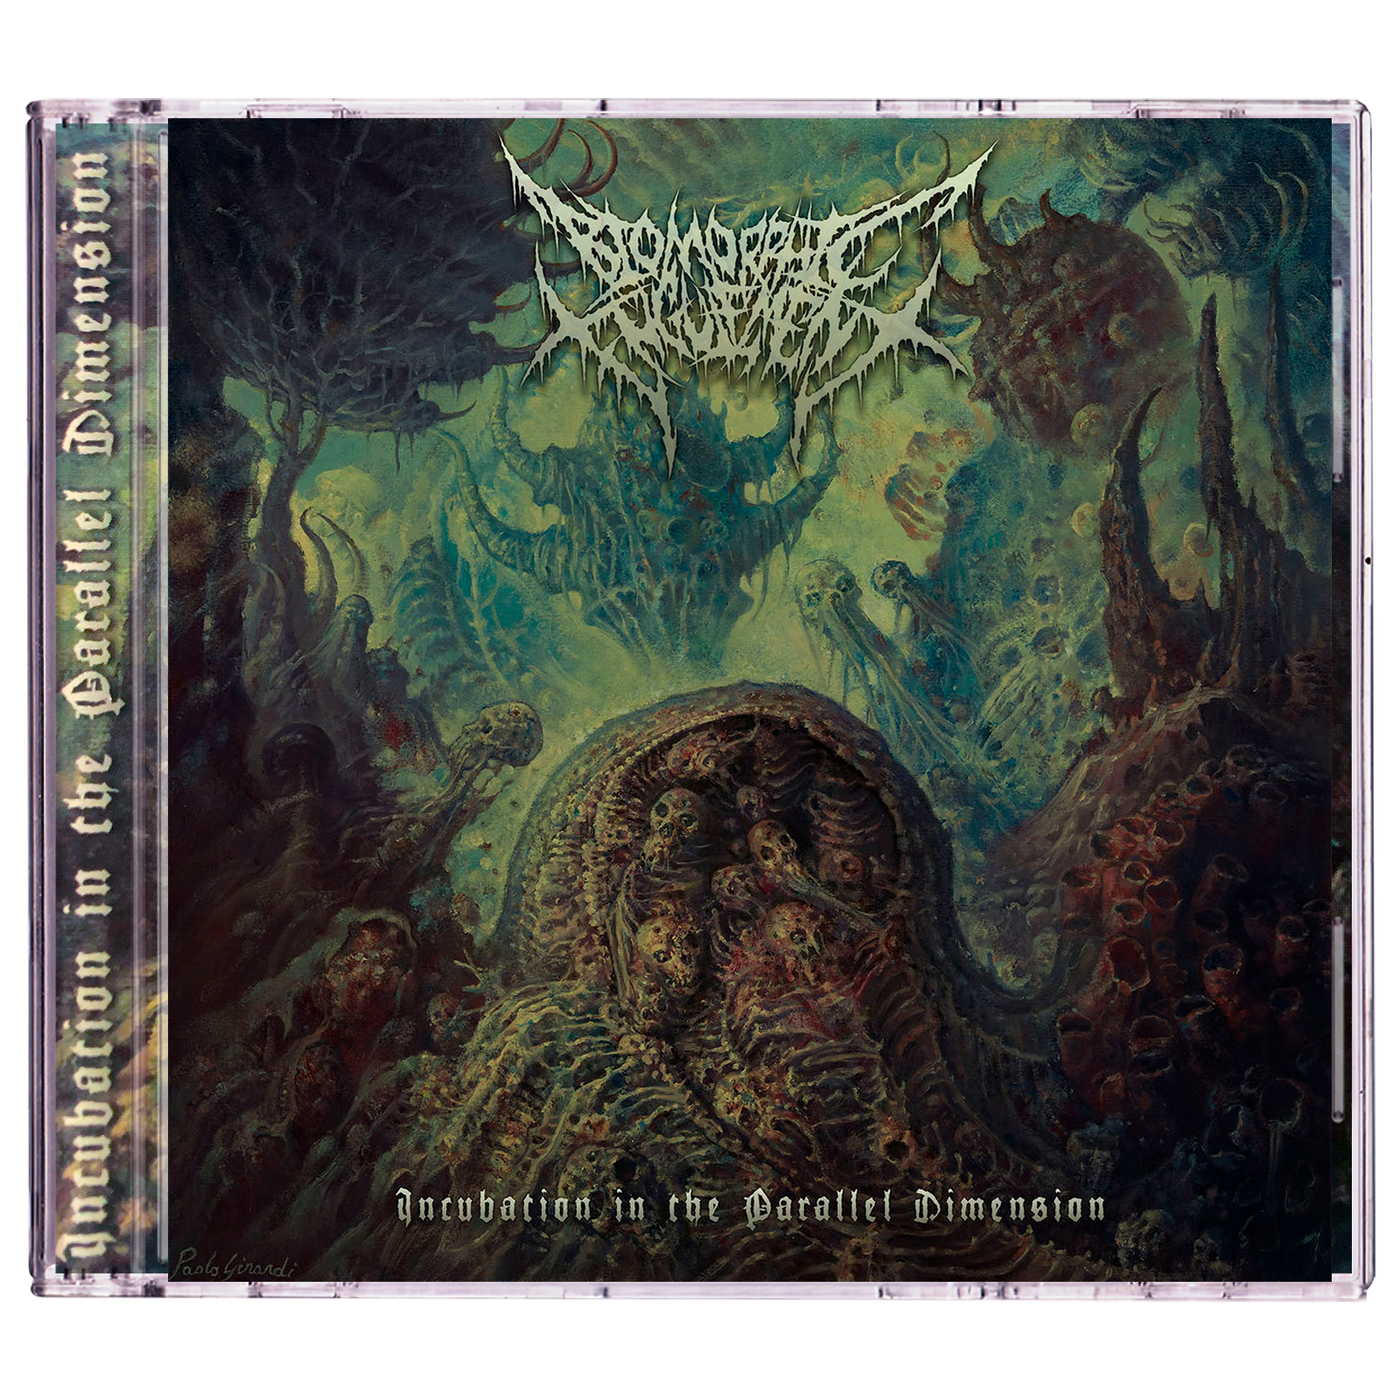 Biomorphic Engulfment 'Incubation In The Parallel Dimension' CD